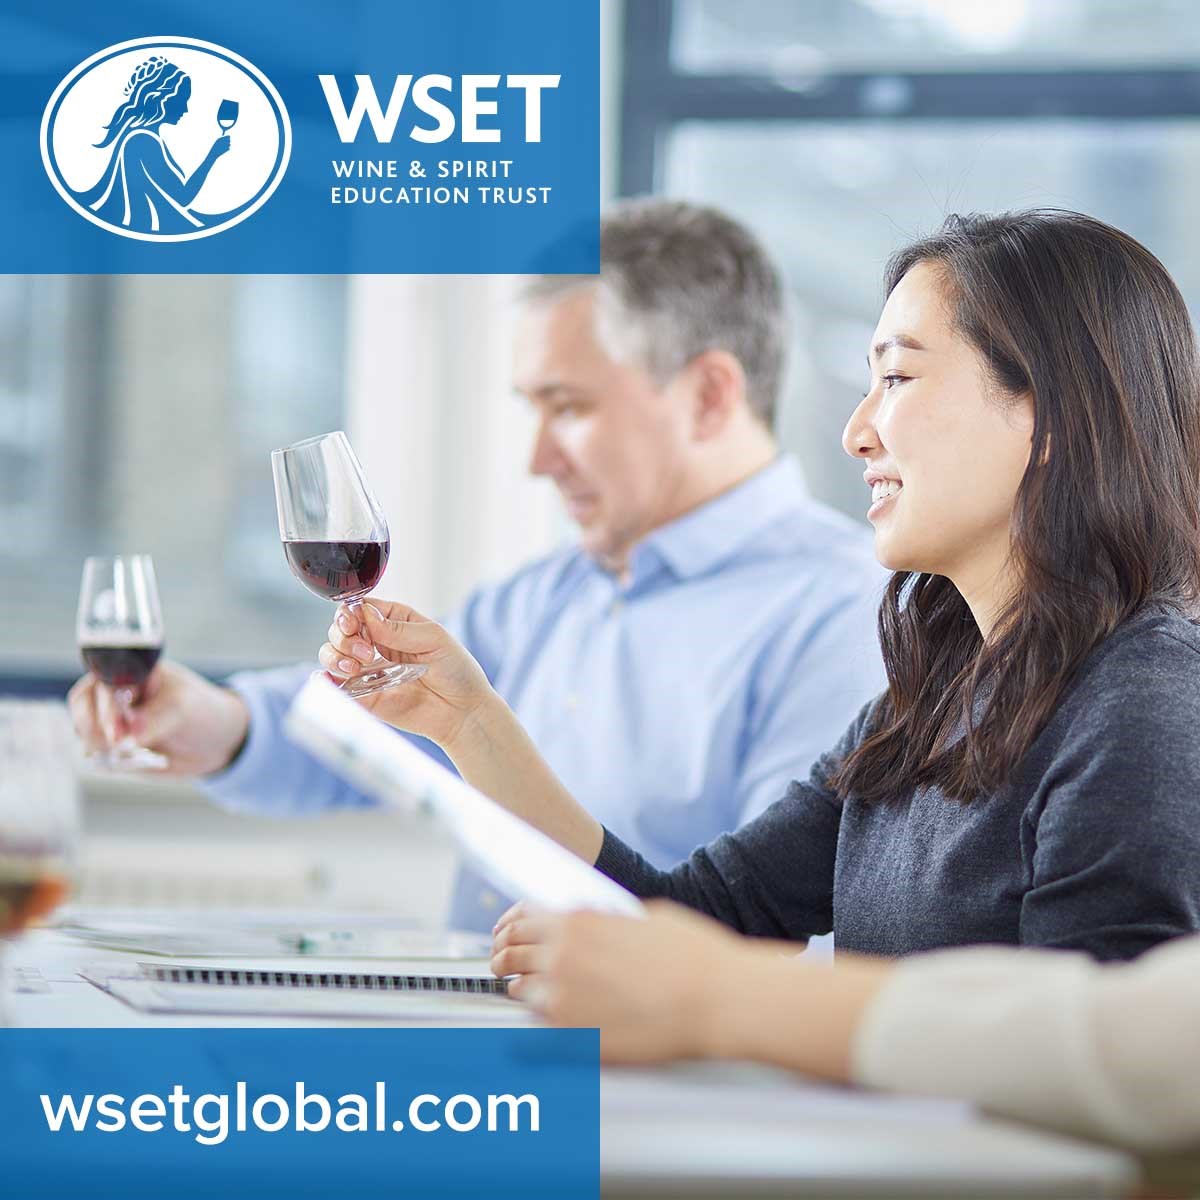 WSET Level 2 wine grid.docx - WSET Level 2 Systematic Approach to Tasting  Wine® APPEARANCE Clarity clear - hazy Intensity pale - medium 